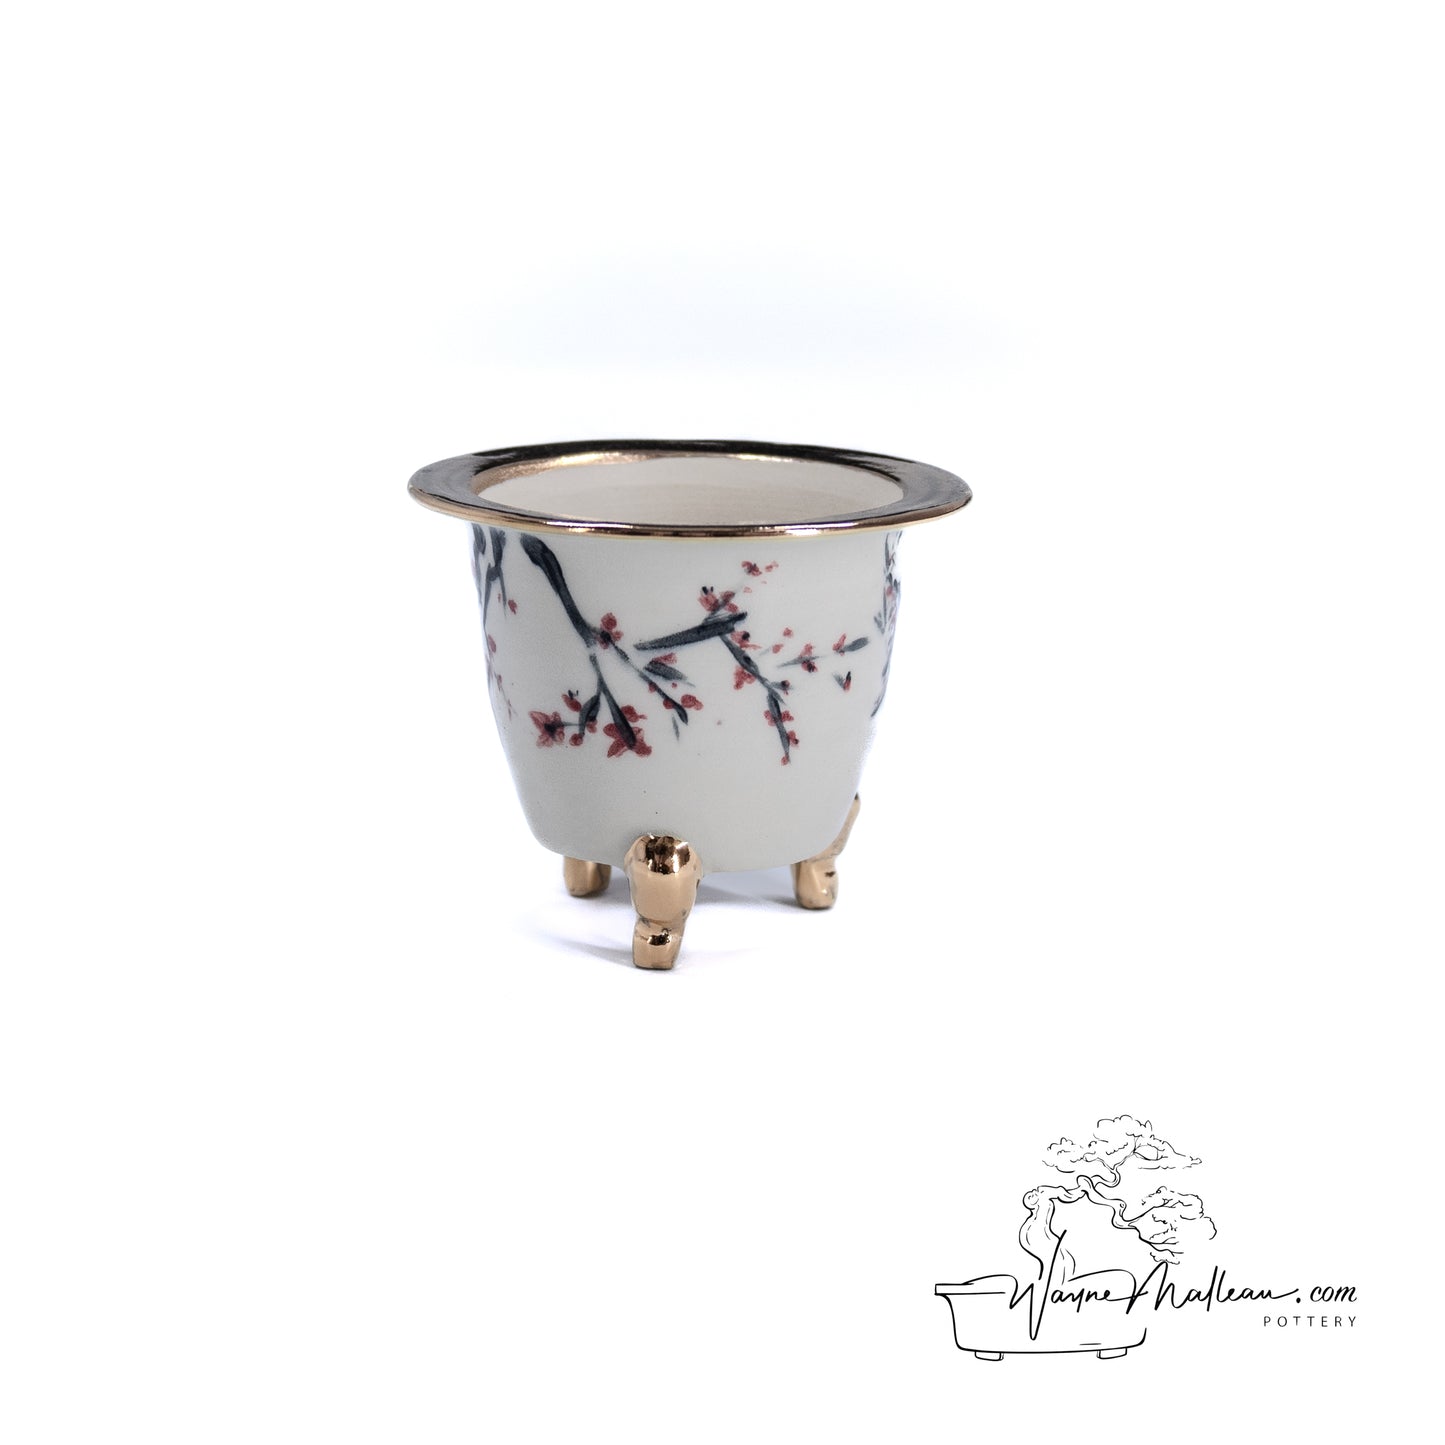 240325174 - royal accented, handpainted neofinetia orchid pot